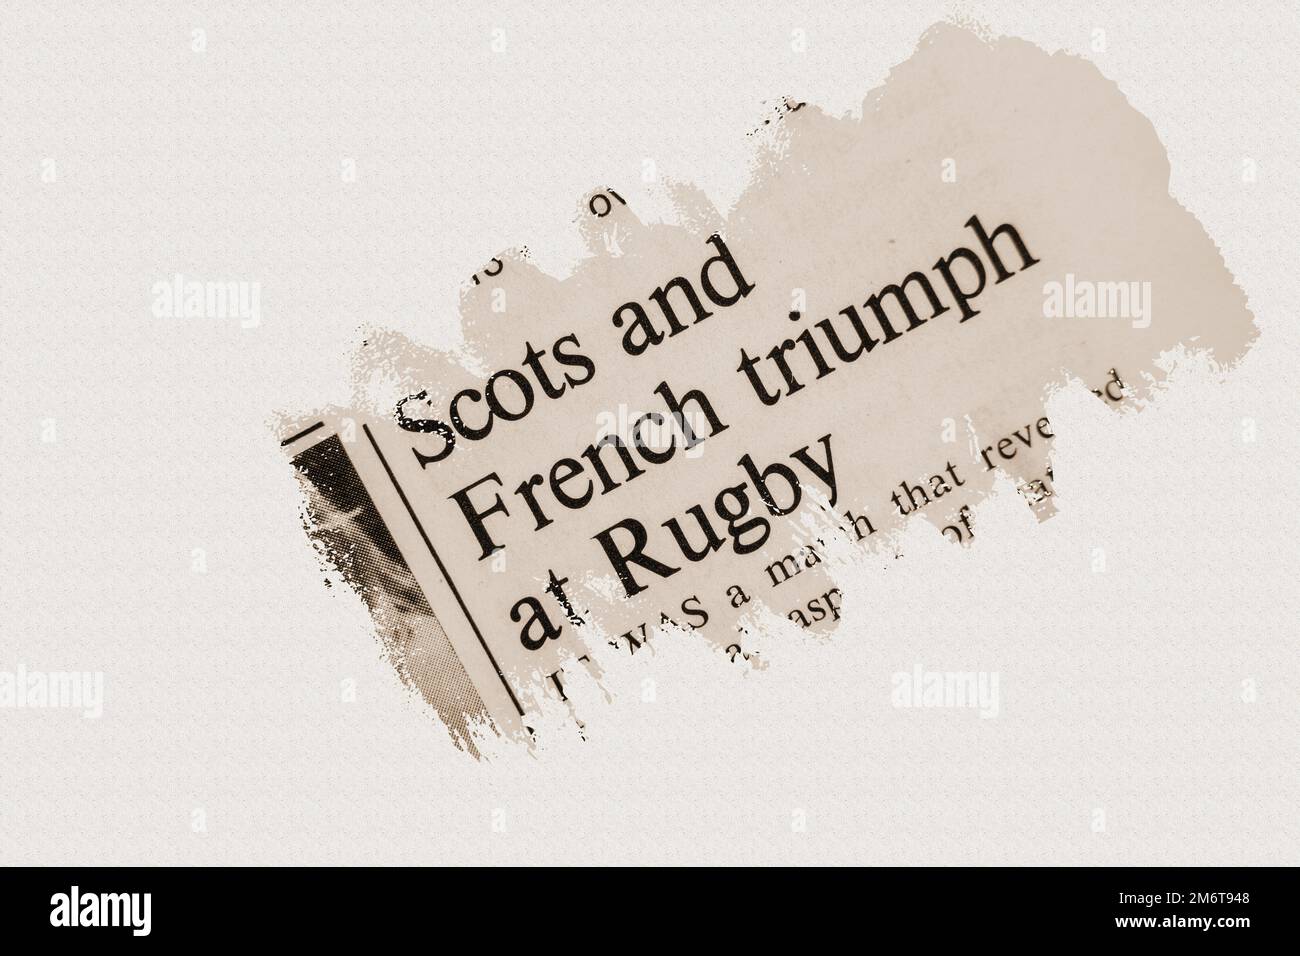 news story from 1975 newspaper headline article title - Scots and French triumph at Rugby - overlay sepia Stock Photo